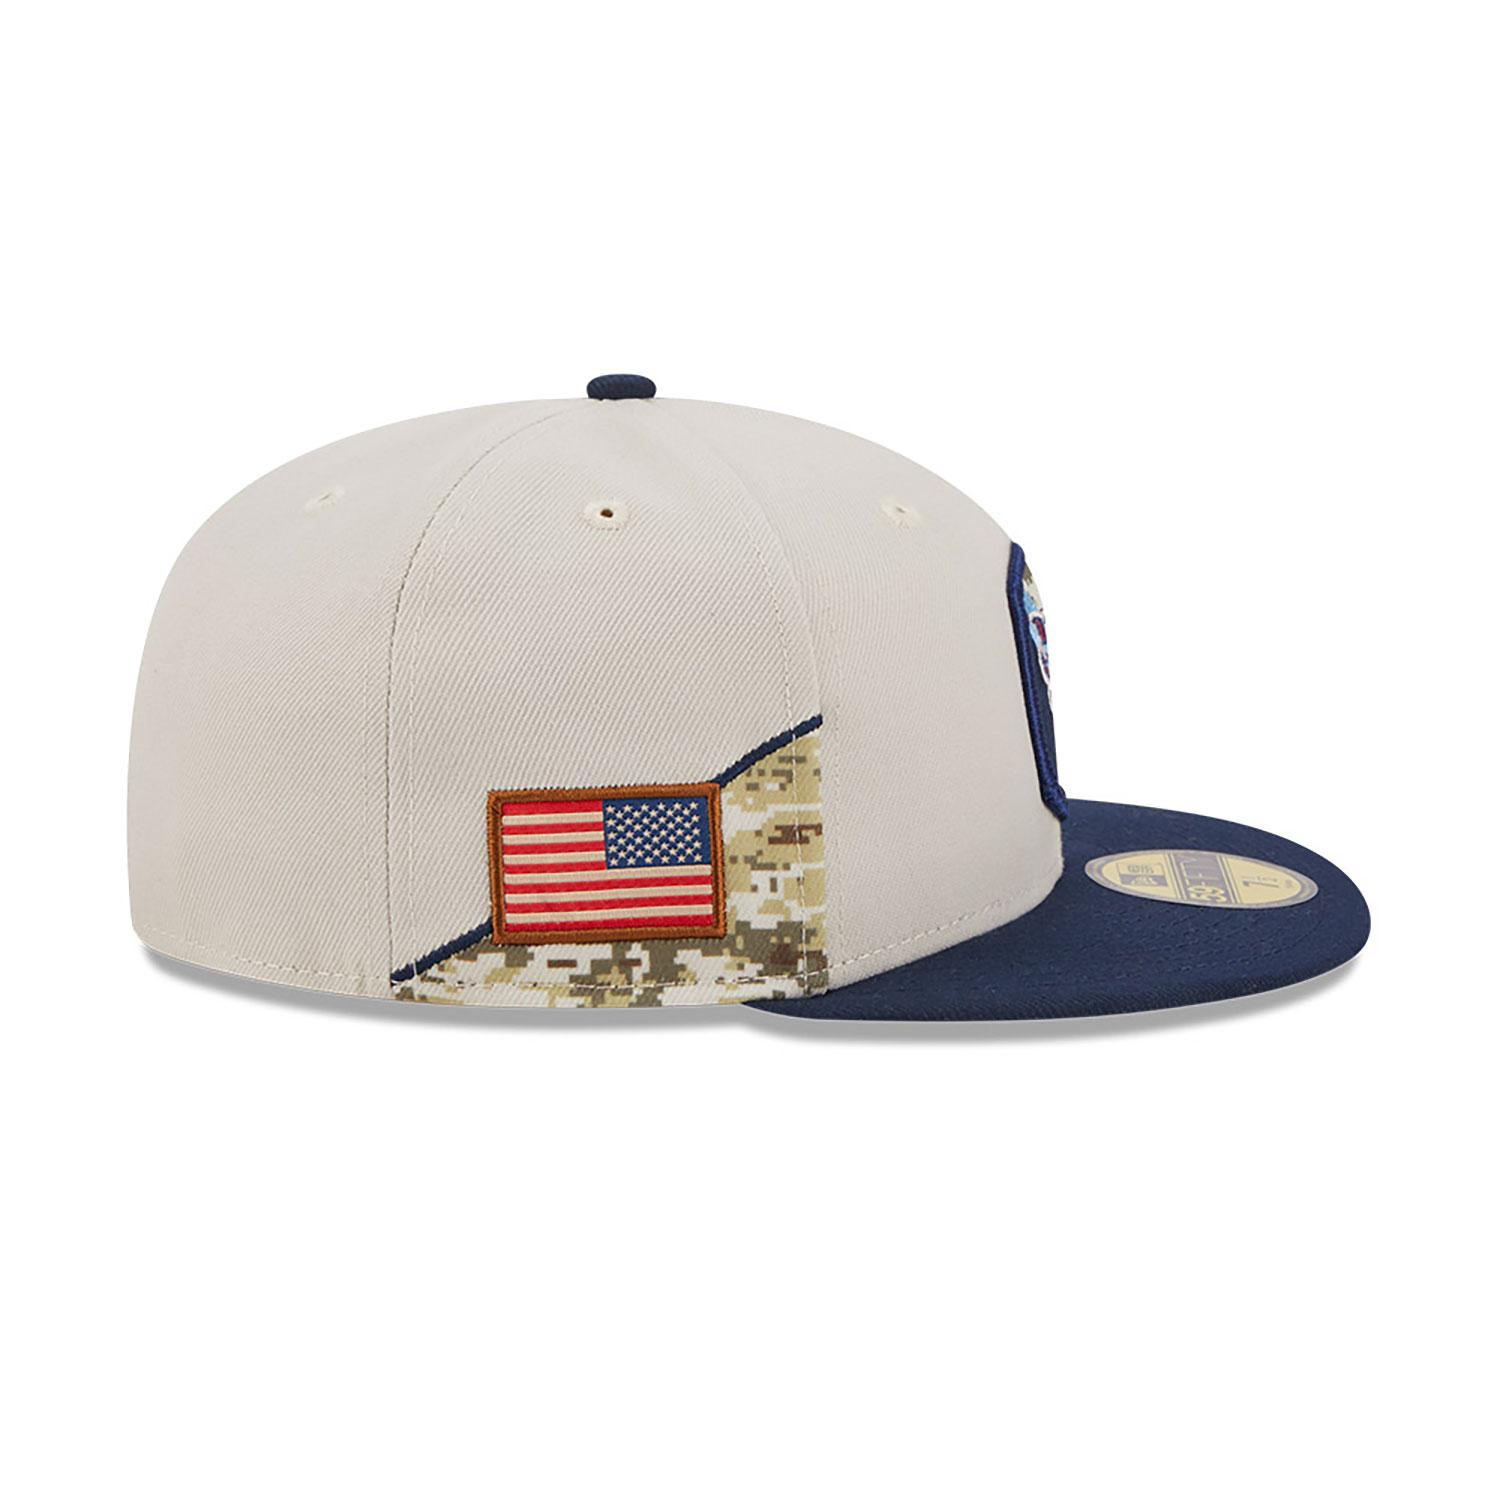 Tennessee Titans NFL Salute To Service Stone 59FIFTY Fitted Cap